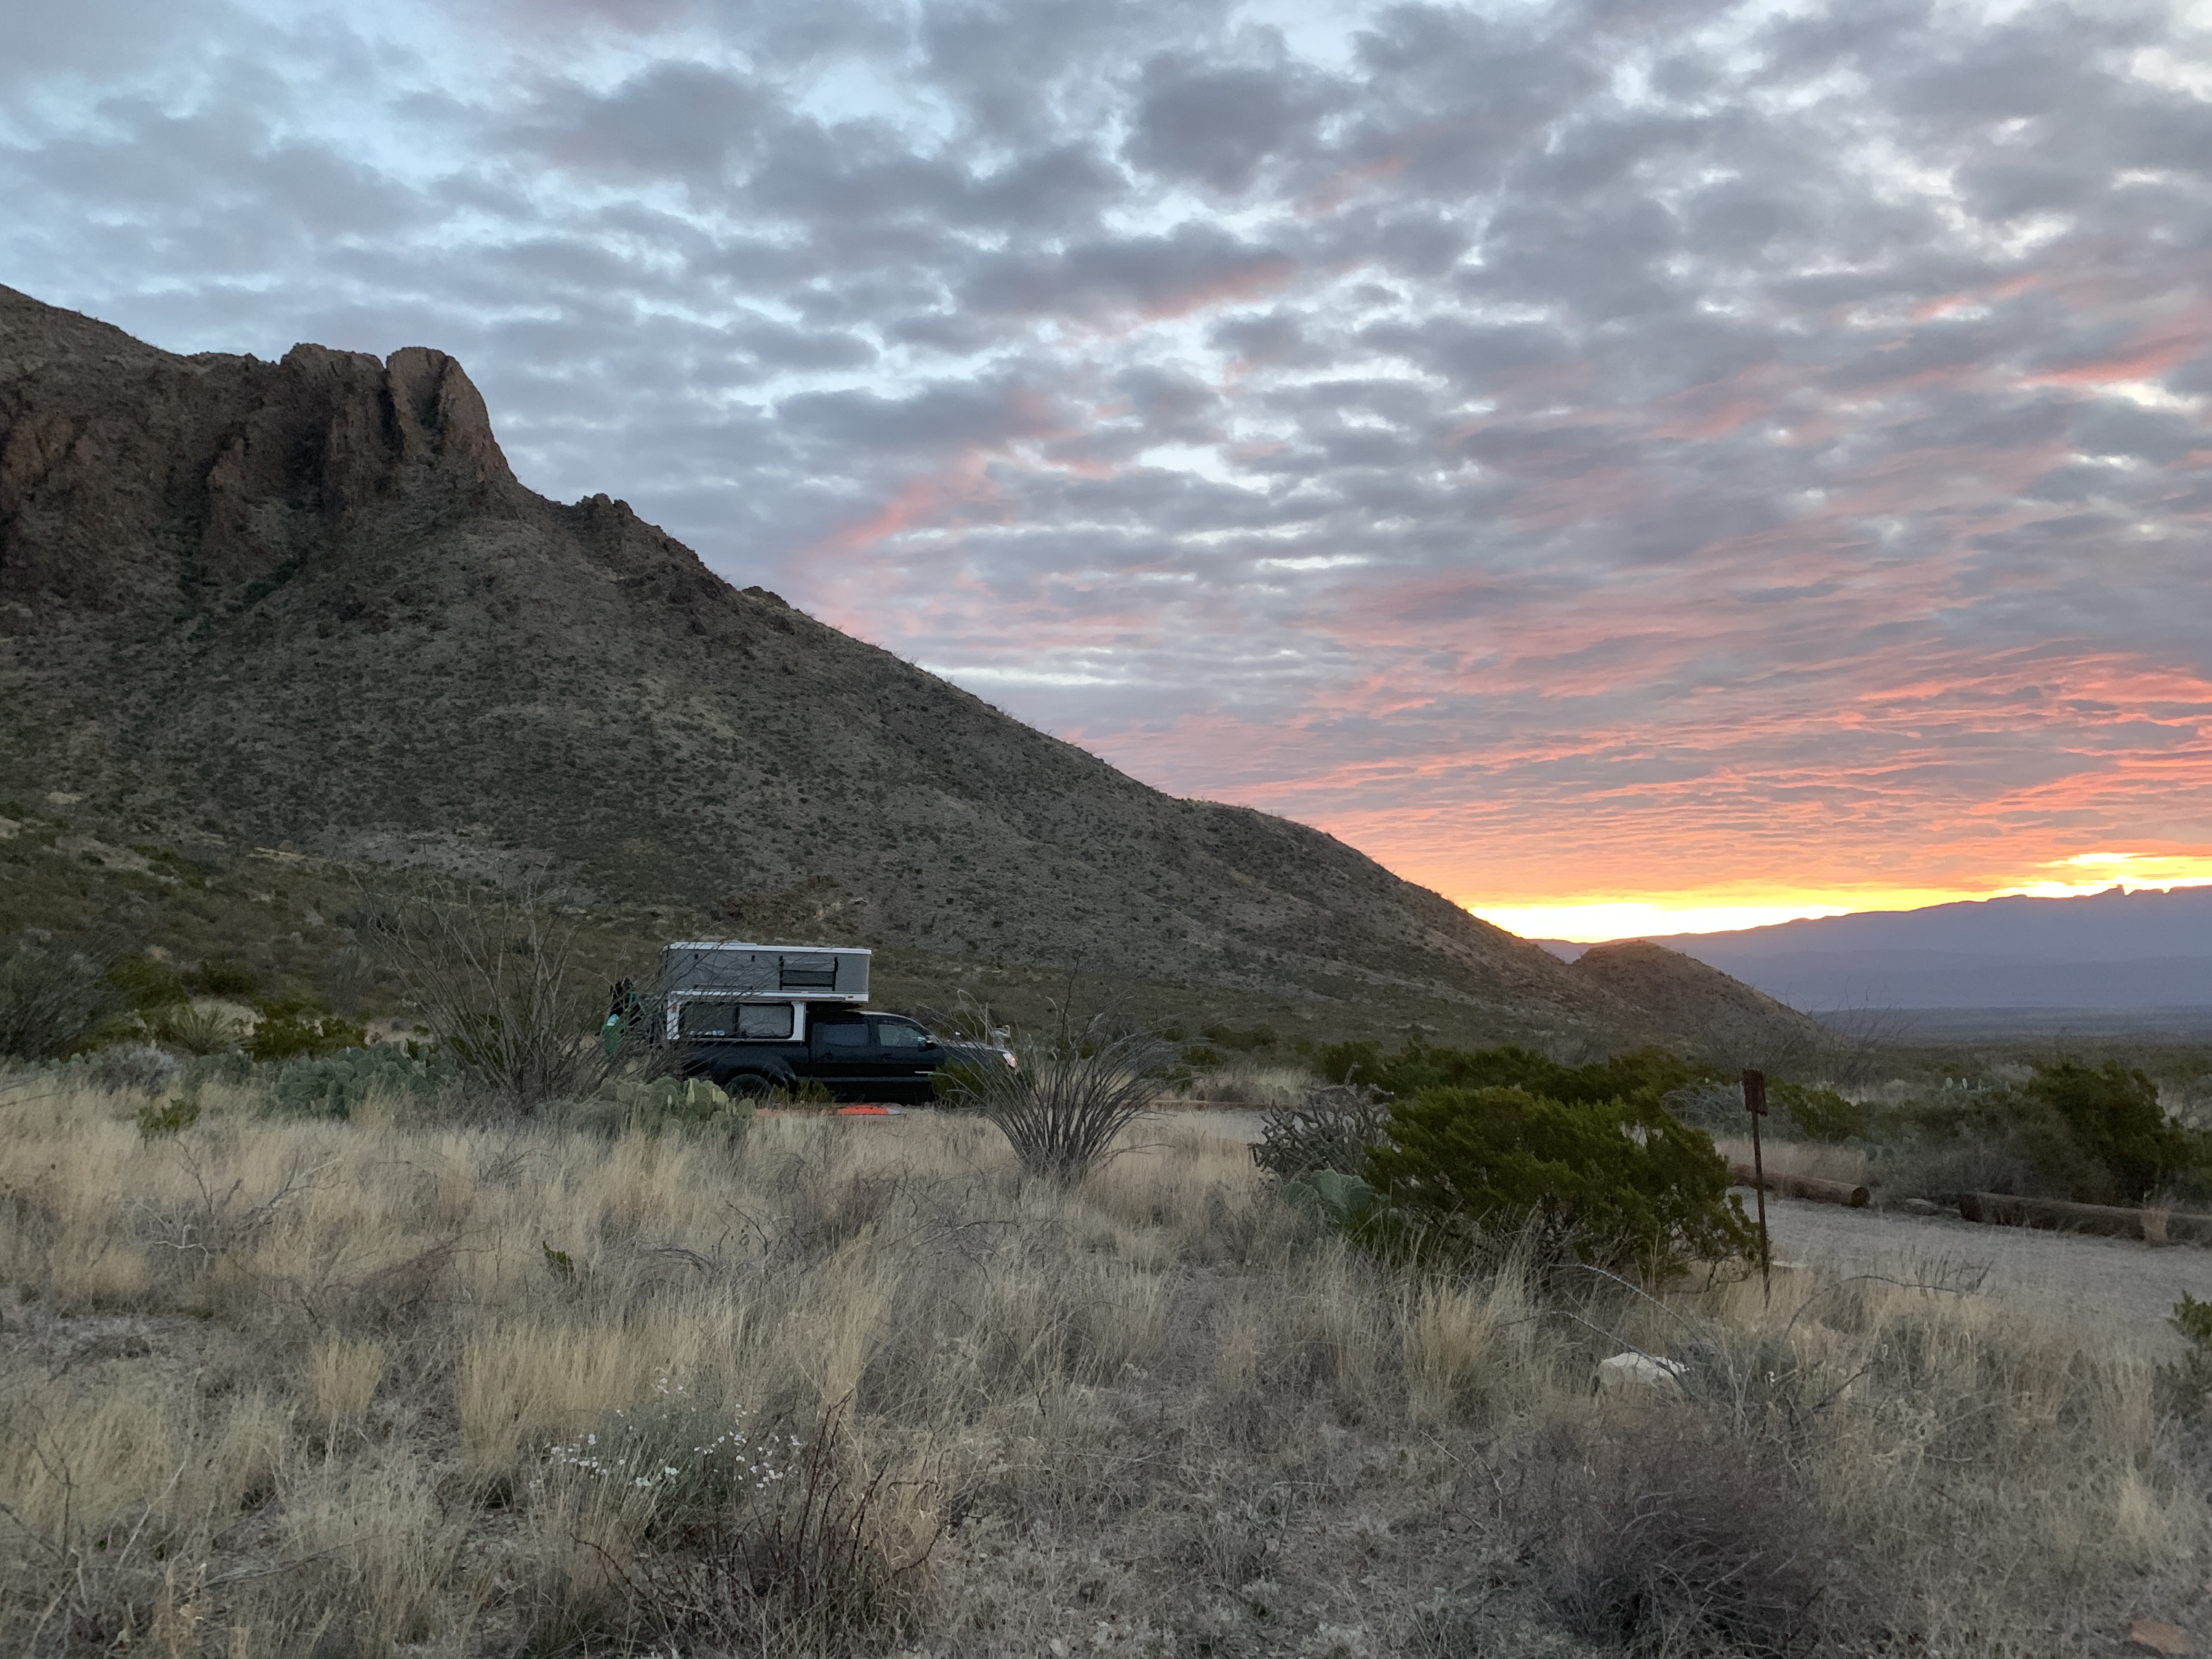 Pine Gap Big Bend Backcountry Dispersed Camping TravelSages